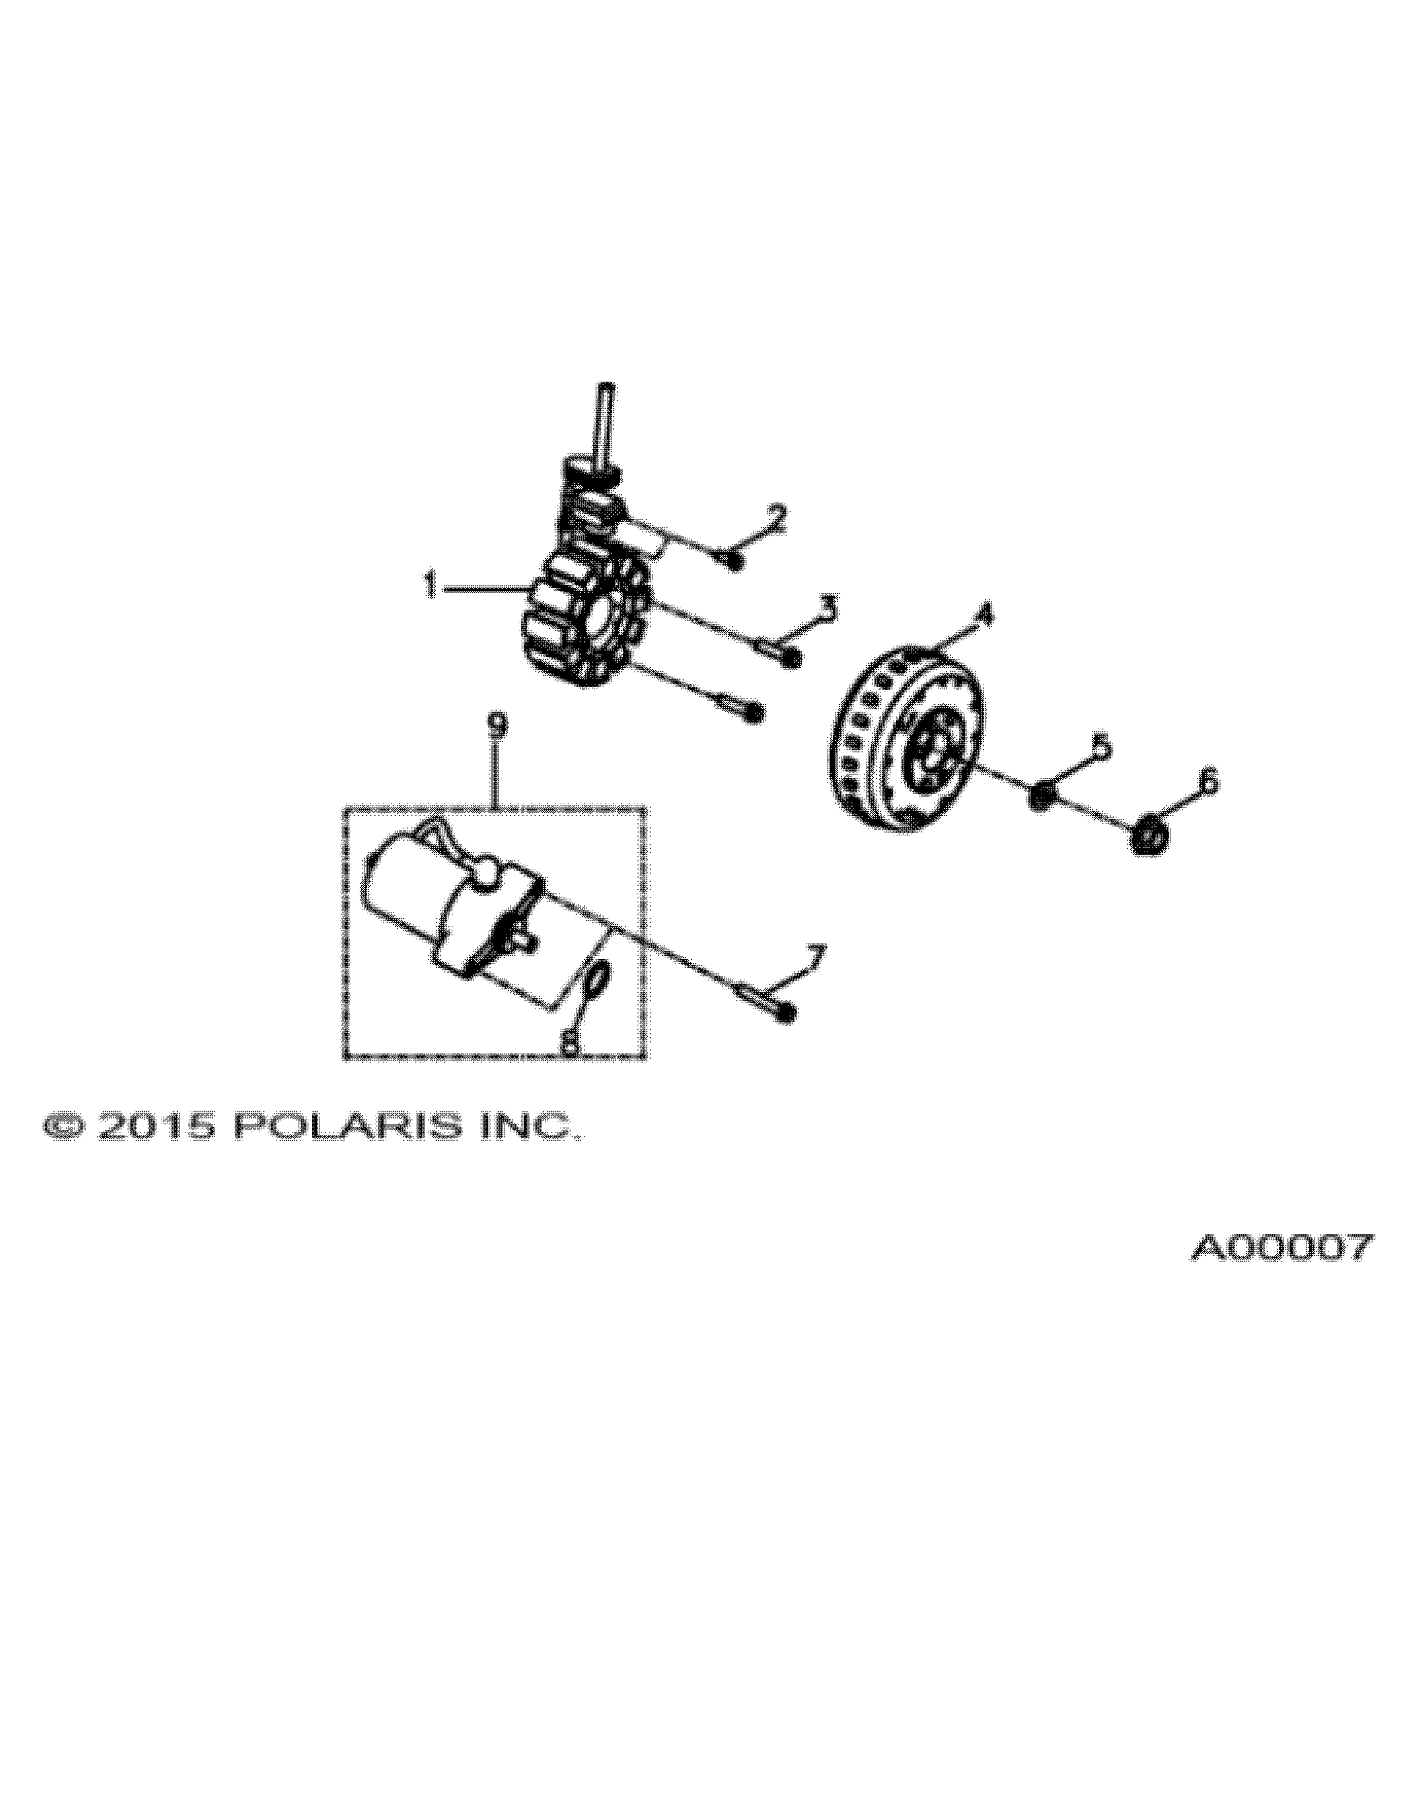 ENGINE, STATOR and STARTING MOTOR - A17YAF11A5/N5 (A00007)